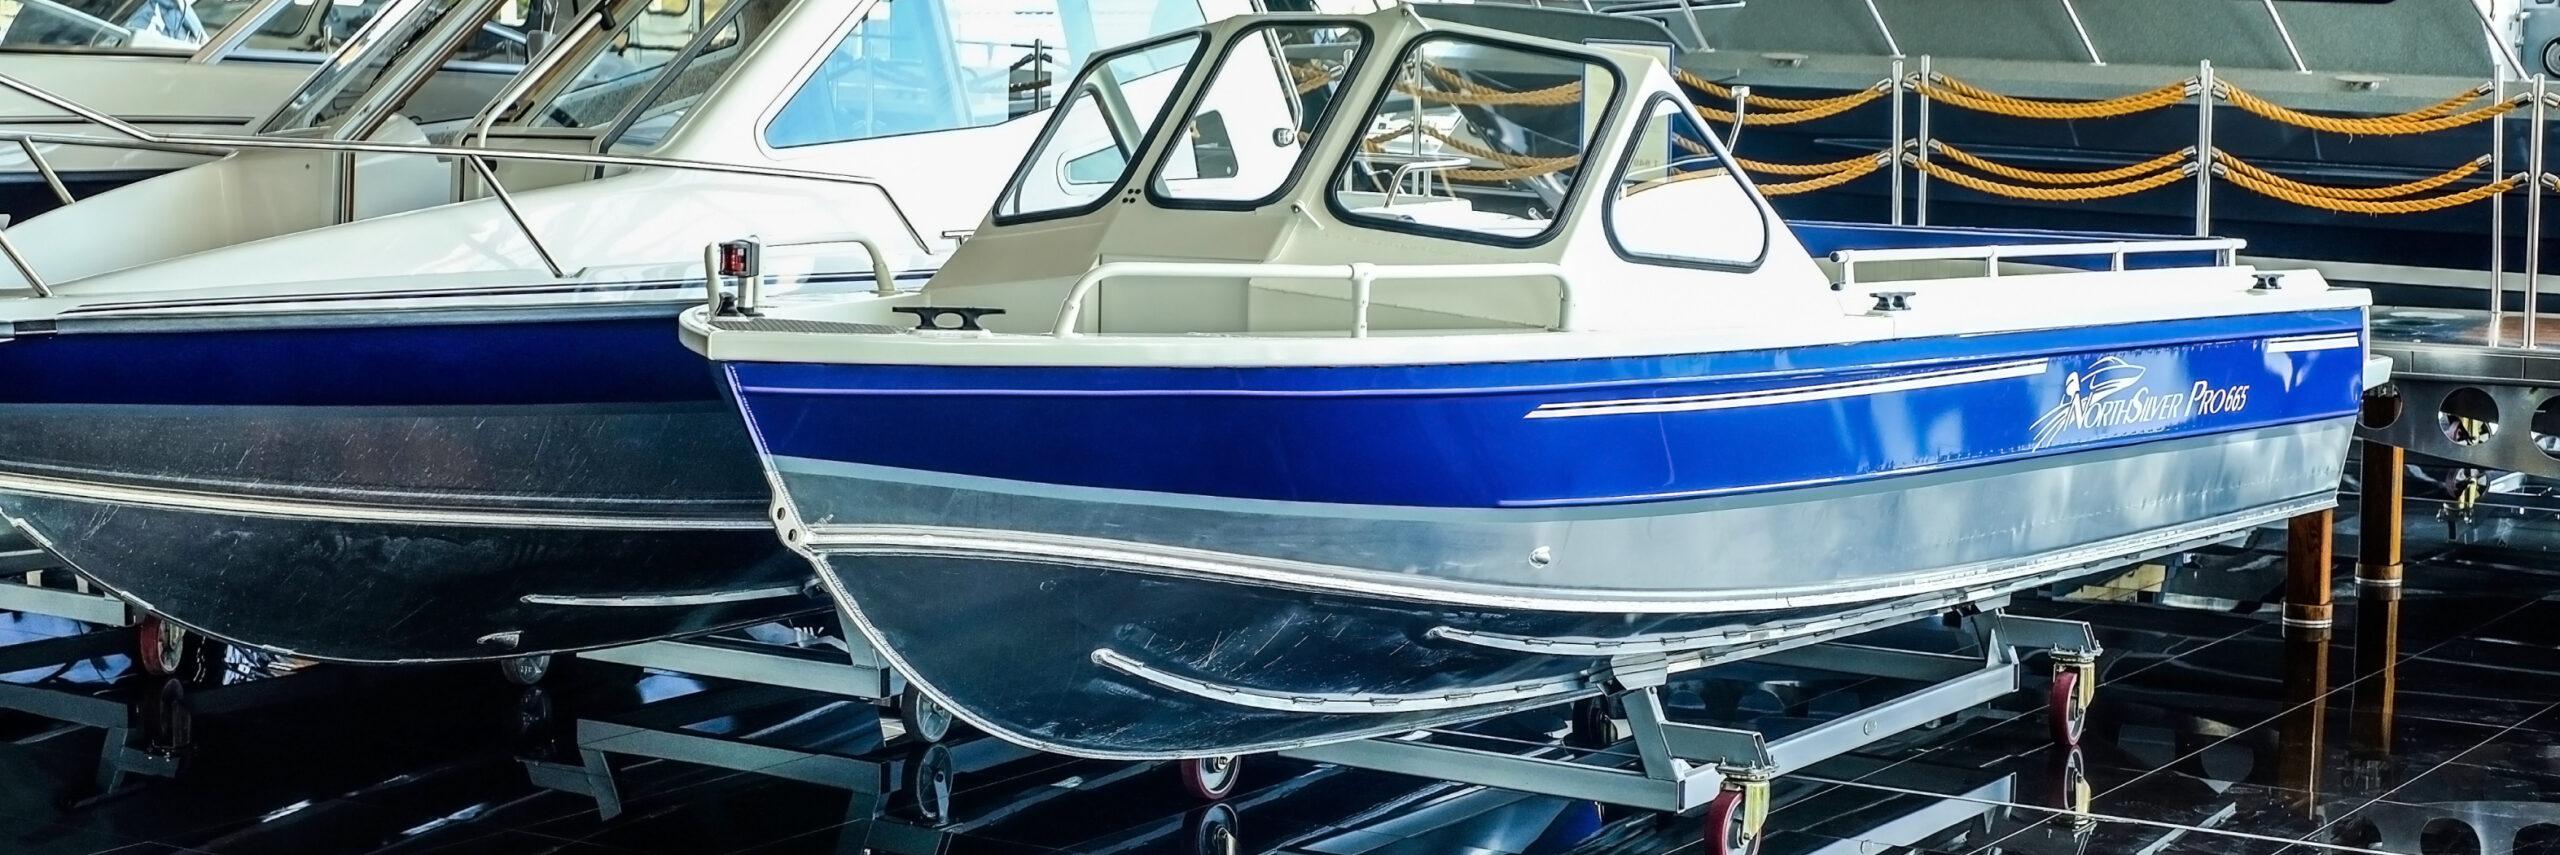 What is Boat Parking and Storage?